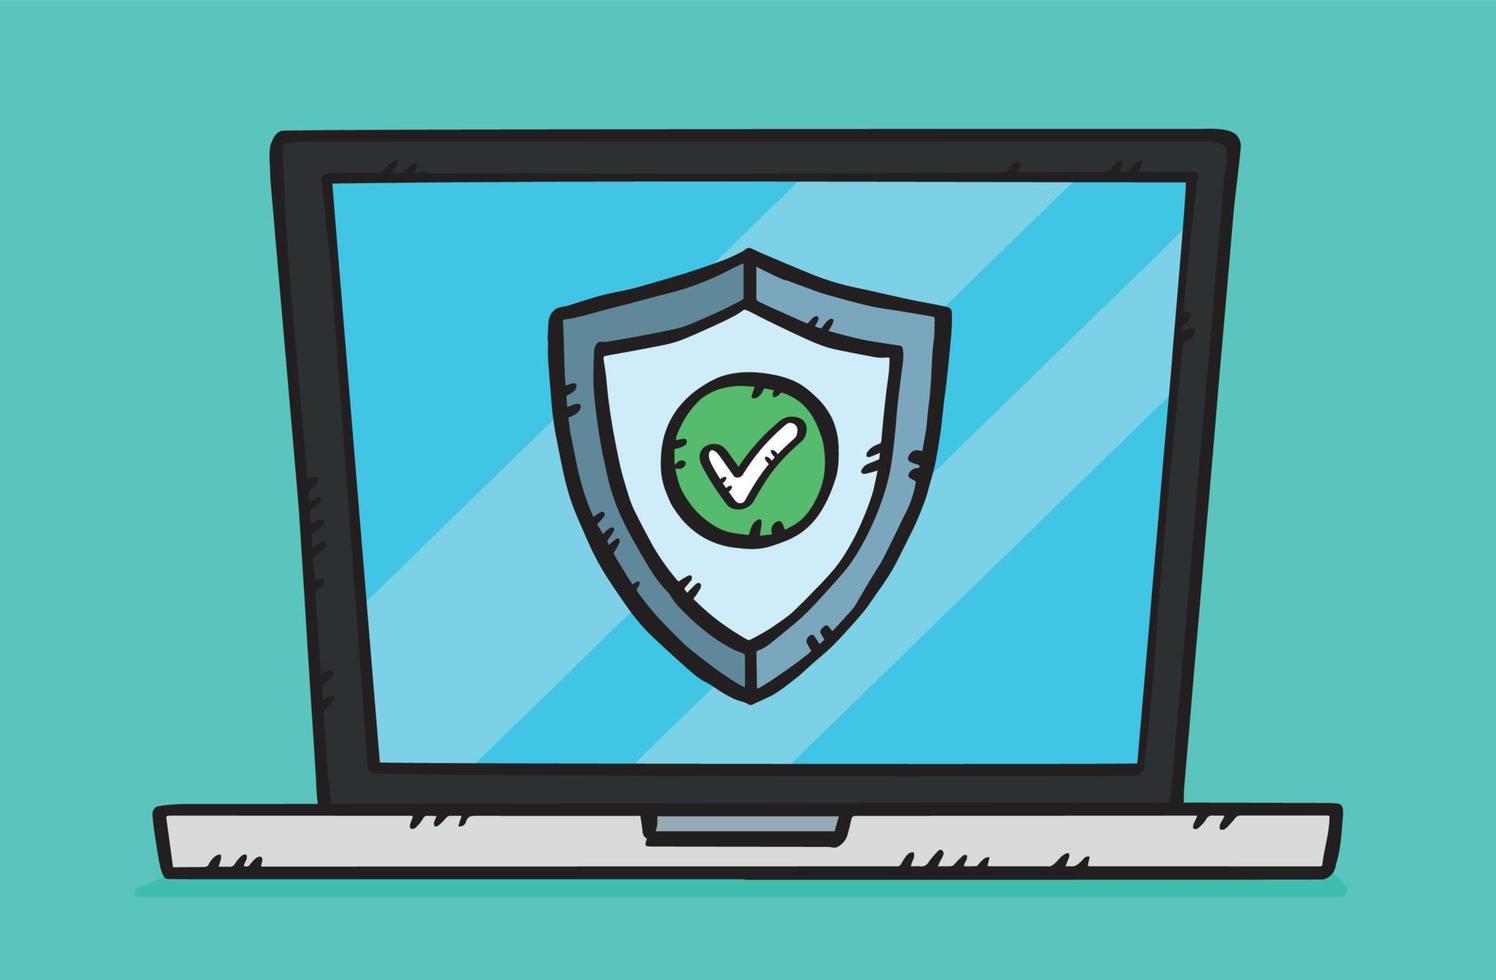 Vector illustration of a laptop protected by an antivirus. A shield with a green check mark is on the laptop screen.